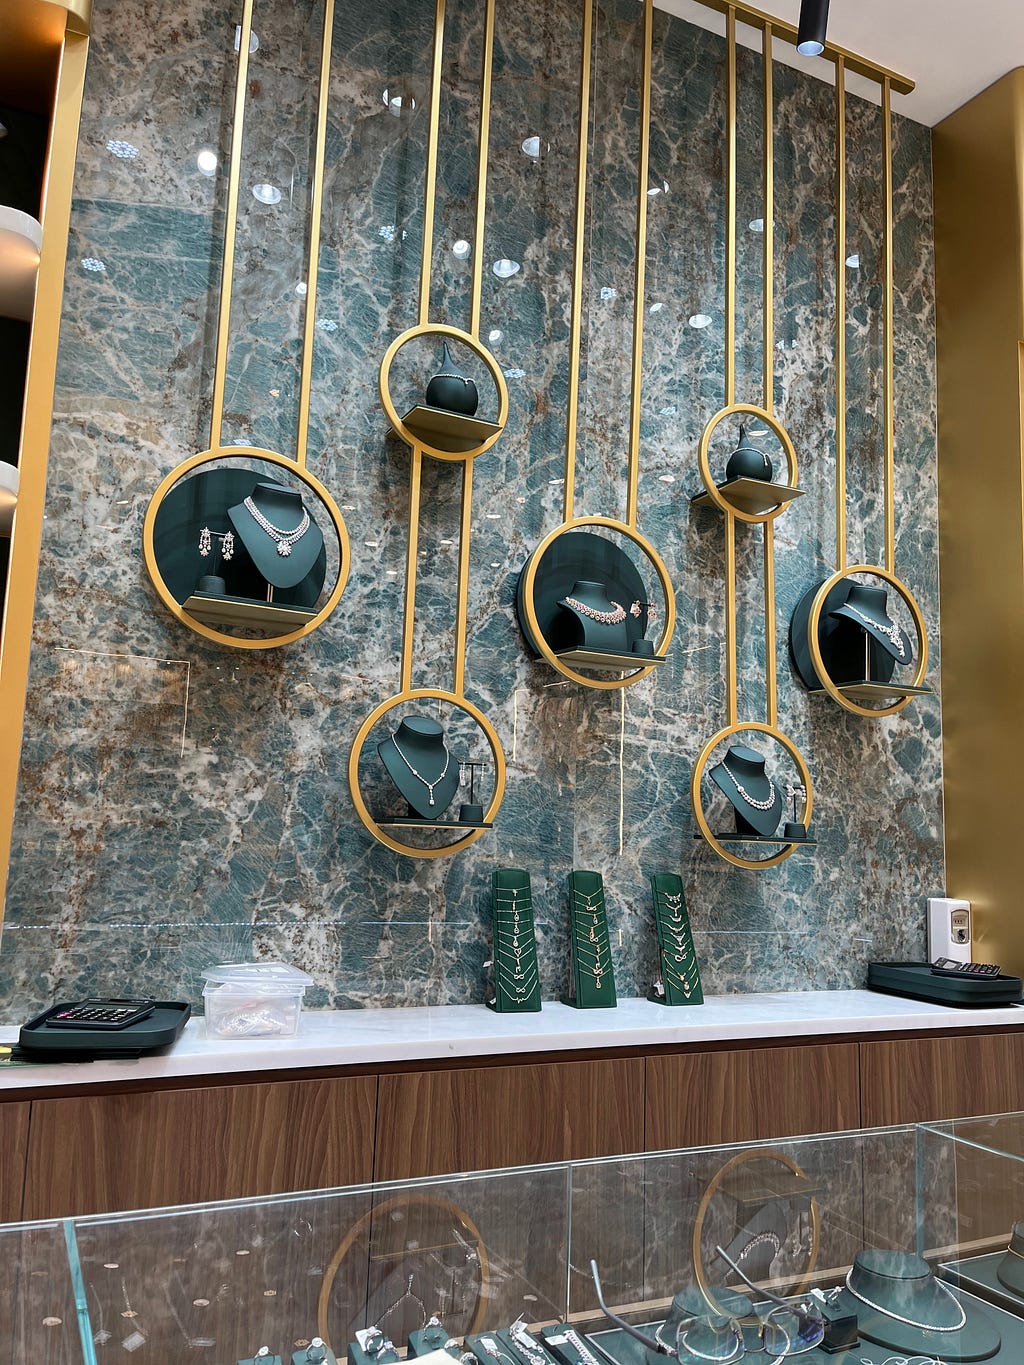 A display of diamond and gold necklaces, ear tops, pendants and chains on a green and light orange granite slab.